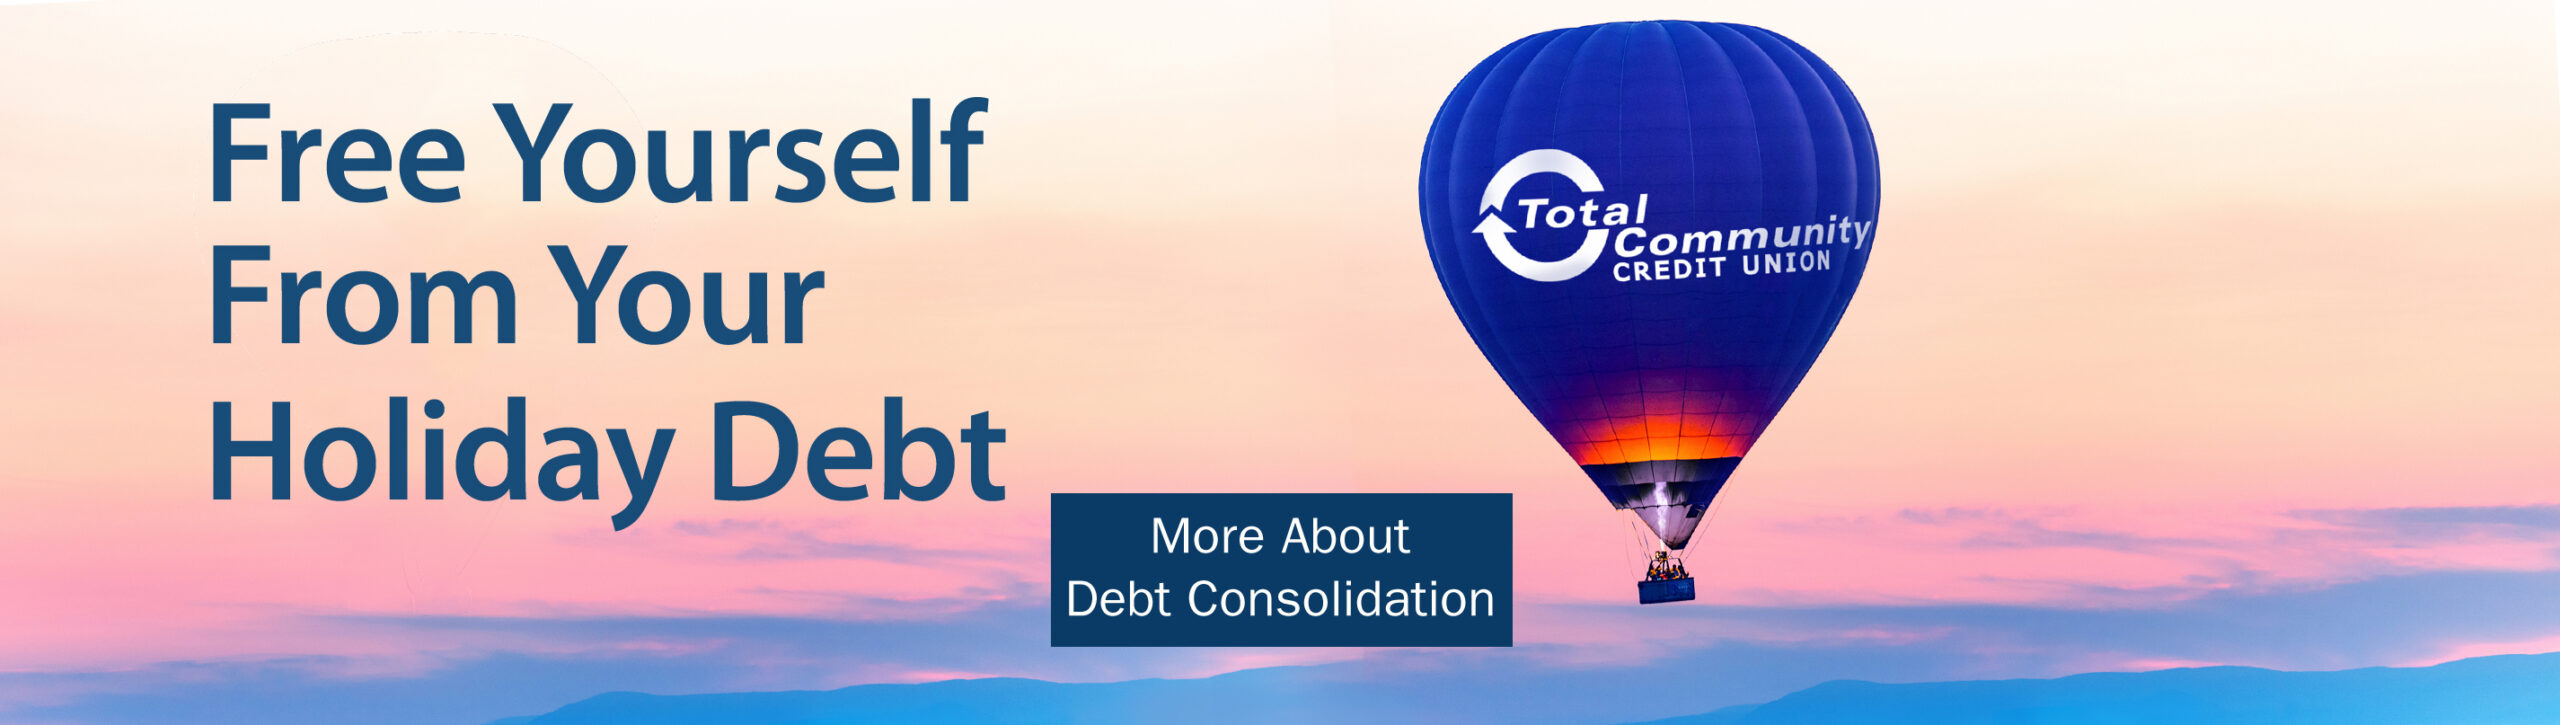 hot air balloon with TCCU logo floats over landscape. Free Yourself from your holiday debt.